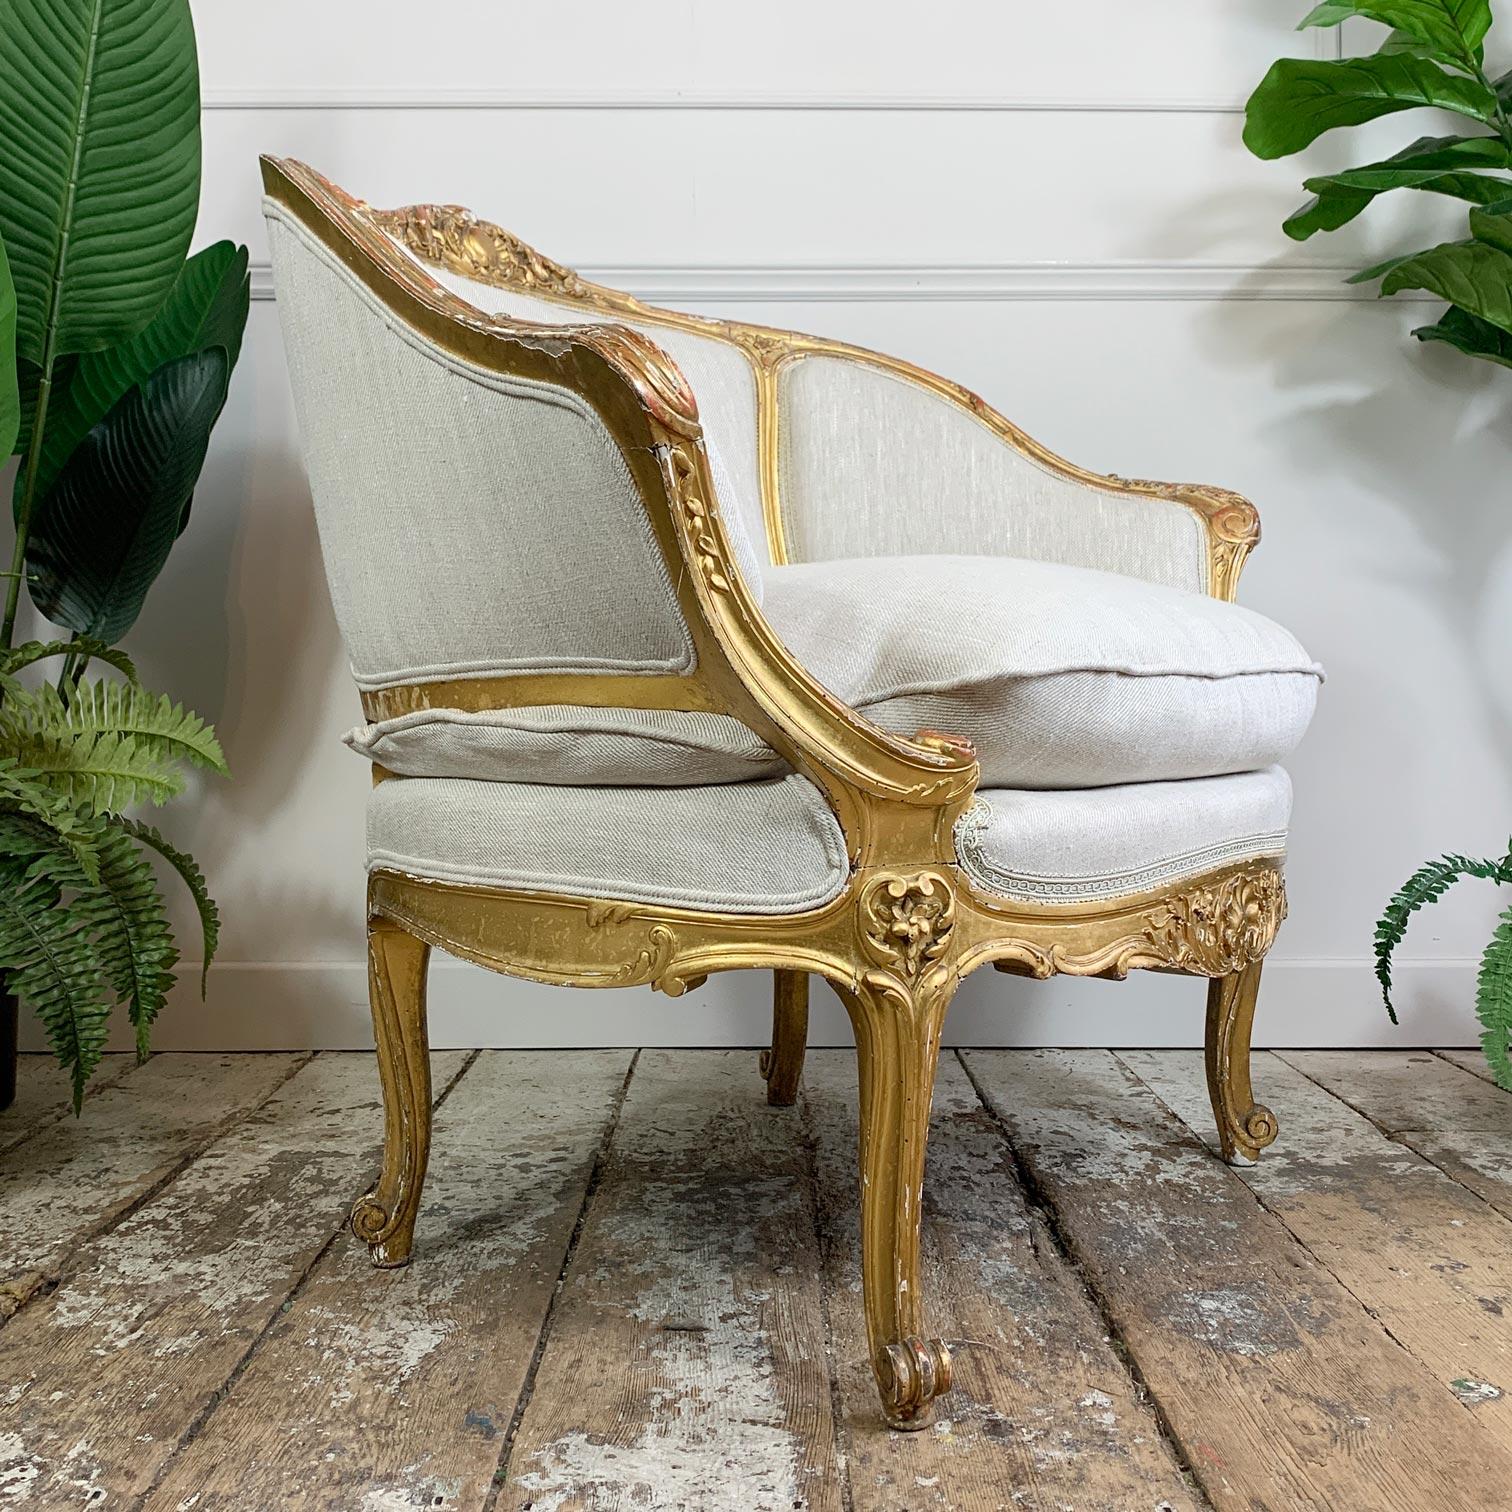 French 19th C Gilt Wood Louis XV Fauteuil Marquise Chair 4